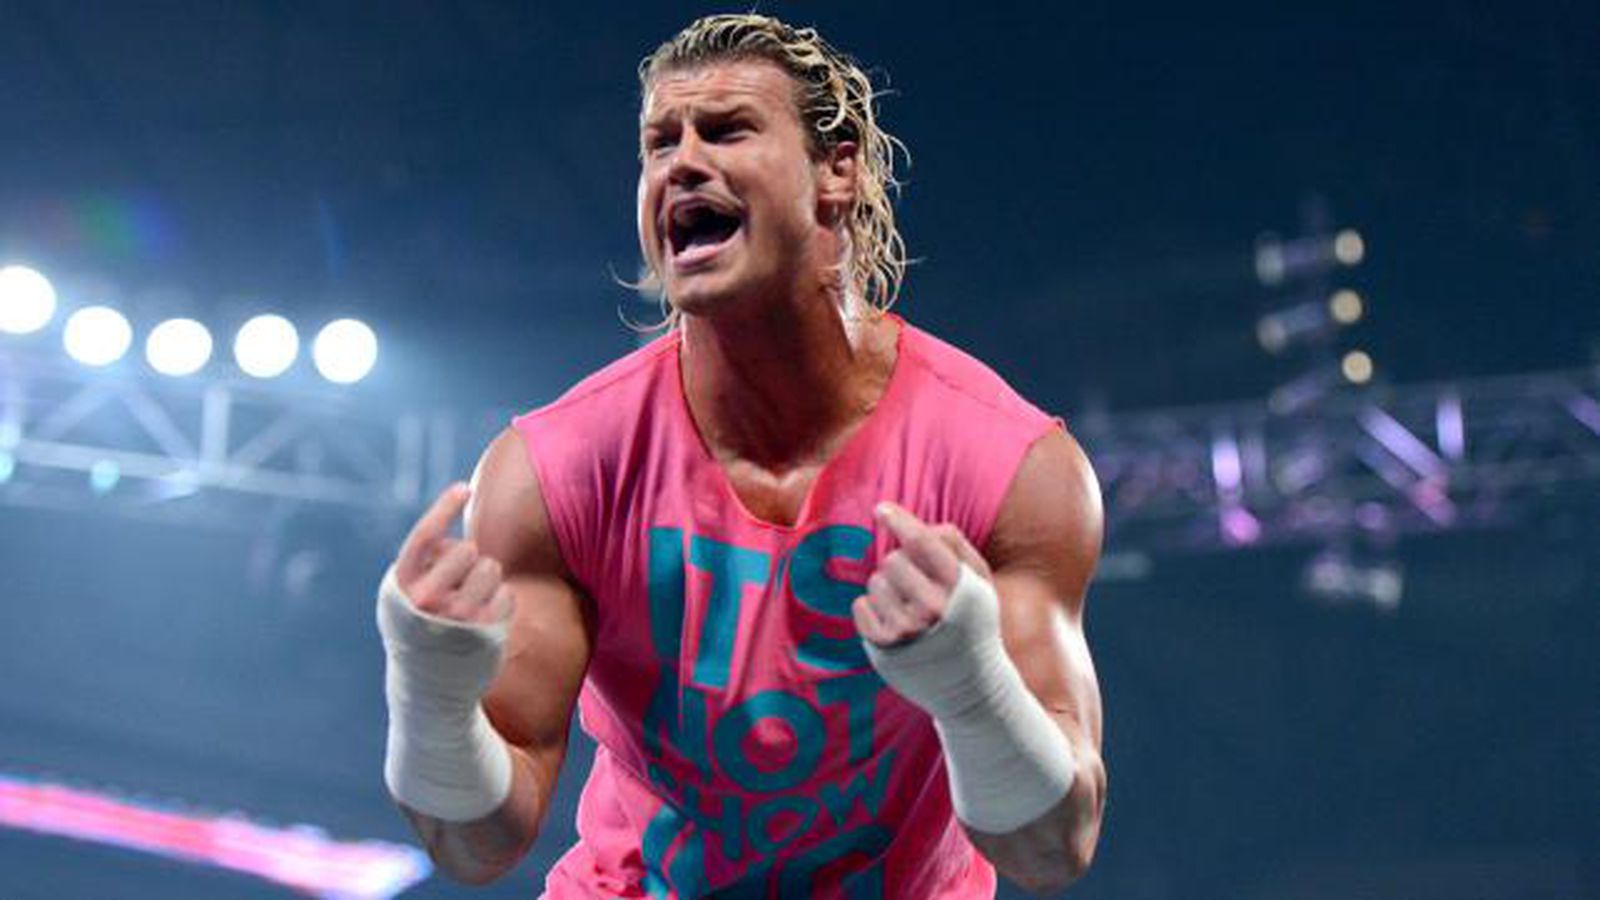 Wwe Dolph Ziggler Rumored To Be On His Way Out That Hashtag Show